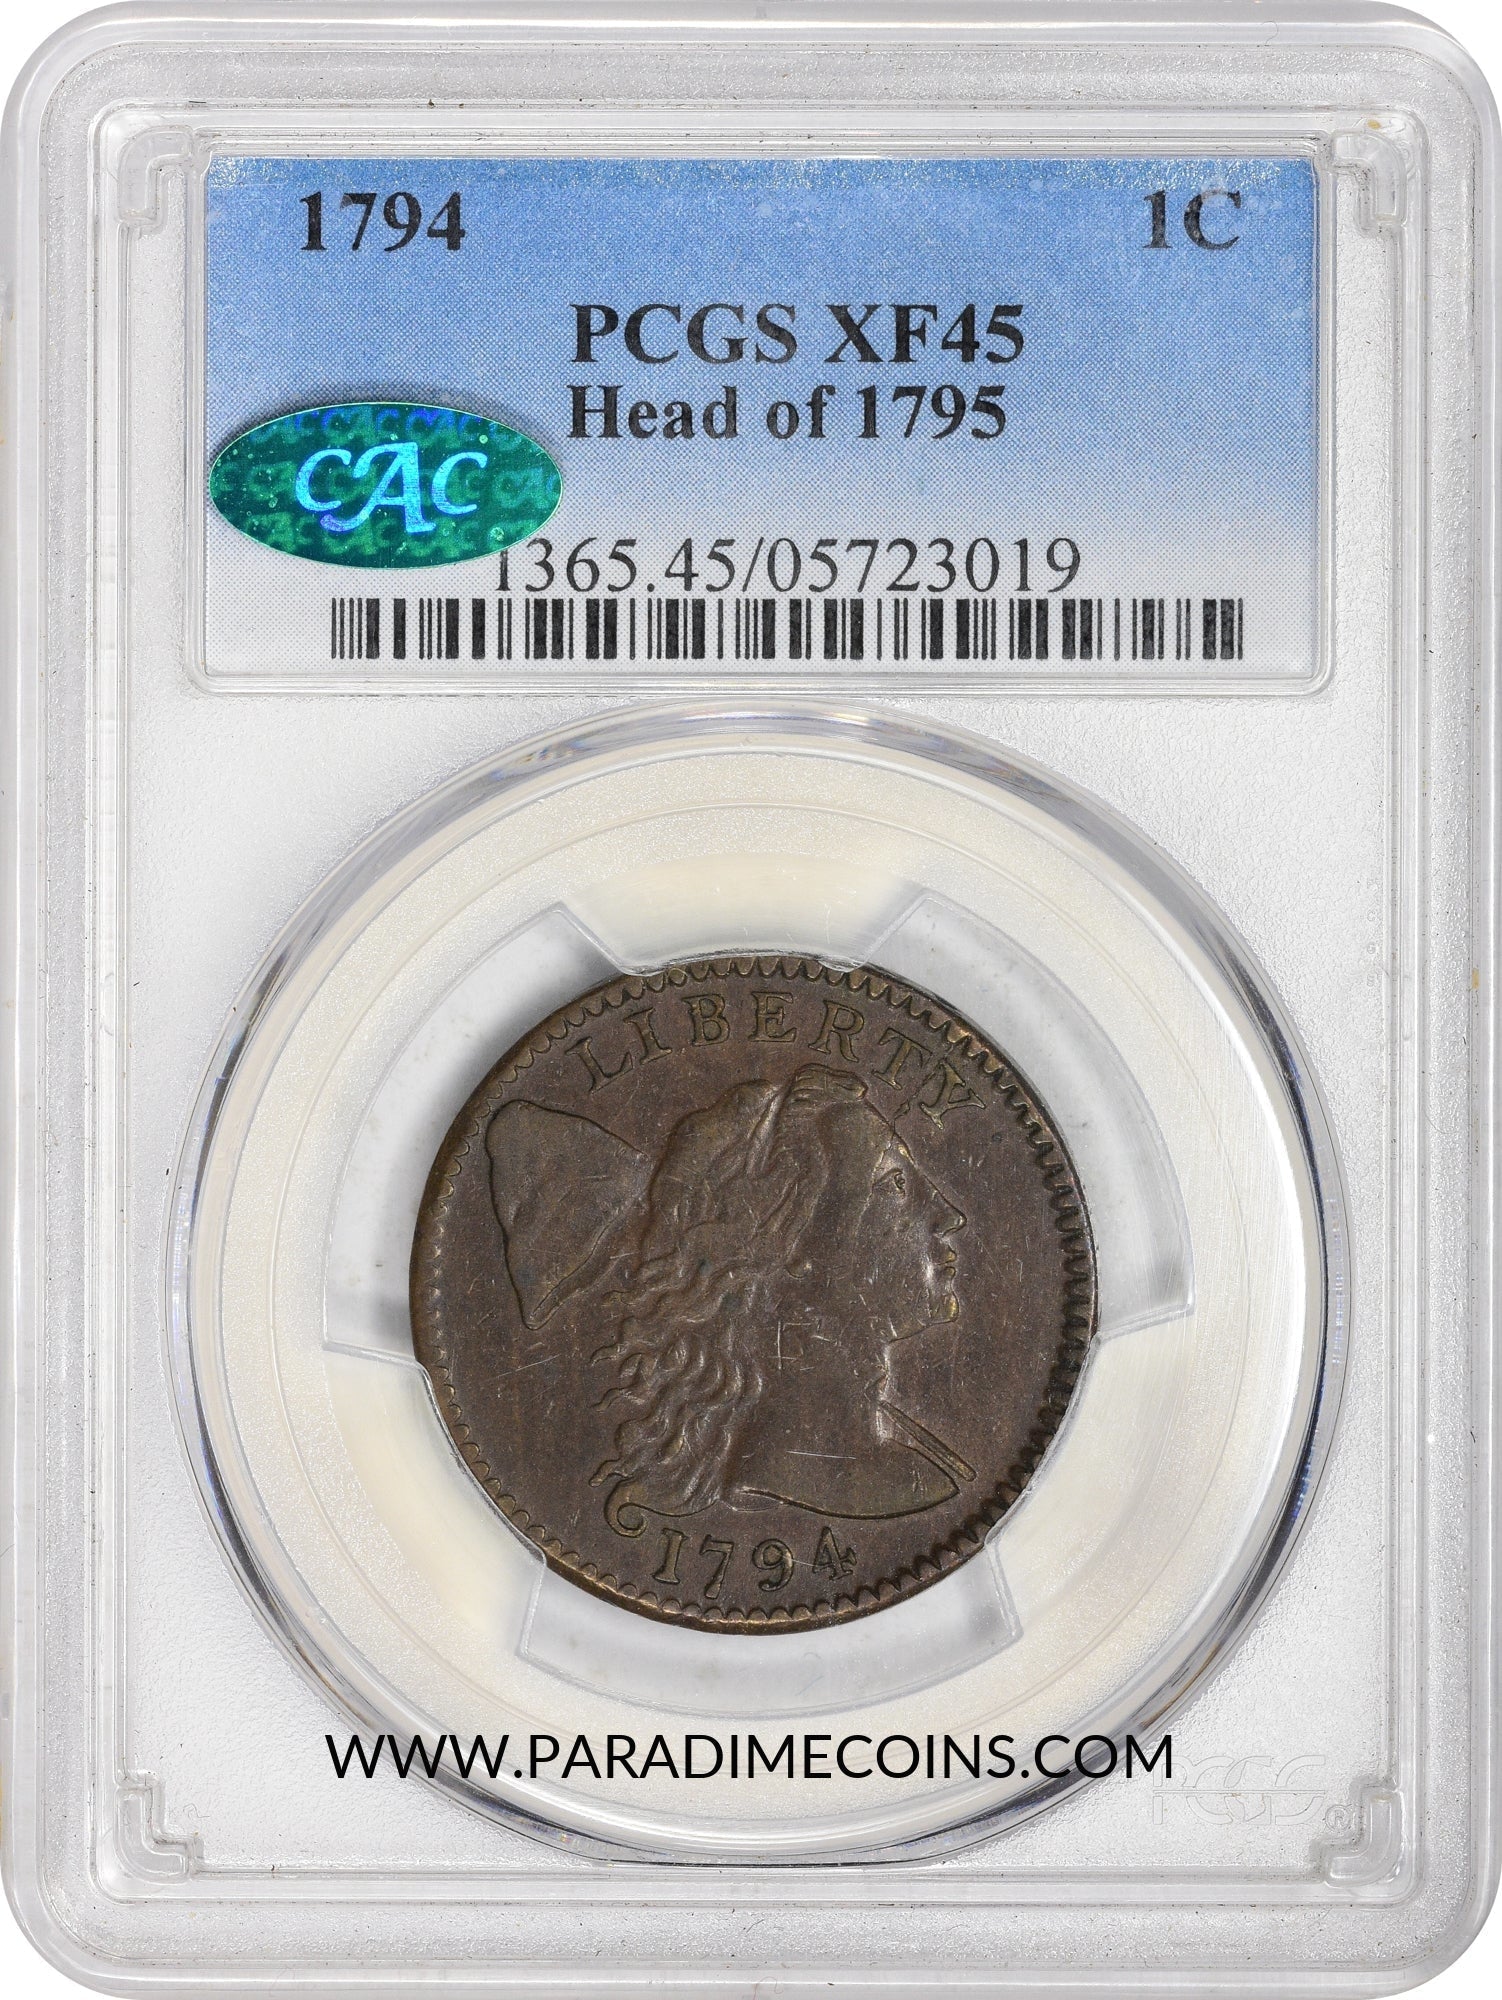 1794 1C S-70 HEAD OF 1795 XF45 PCGS CAC - Paradime Coins US Coins For Sale